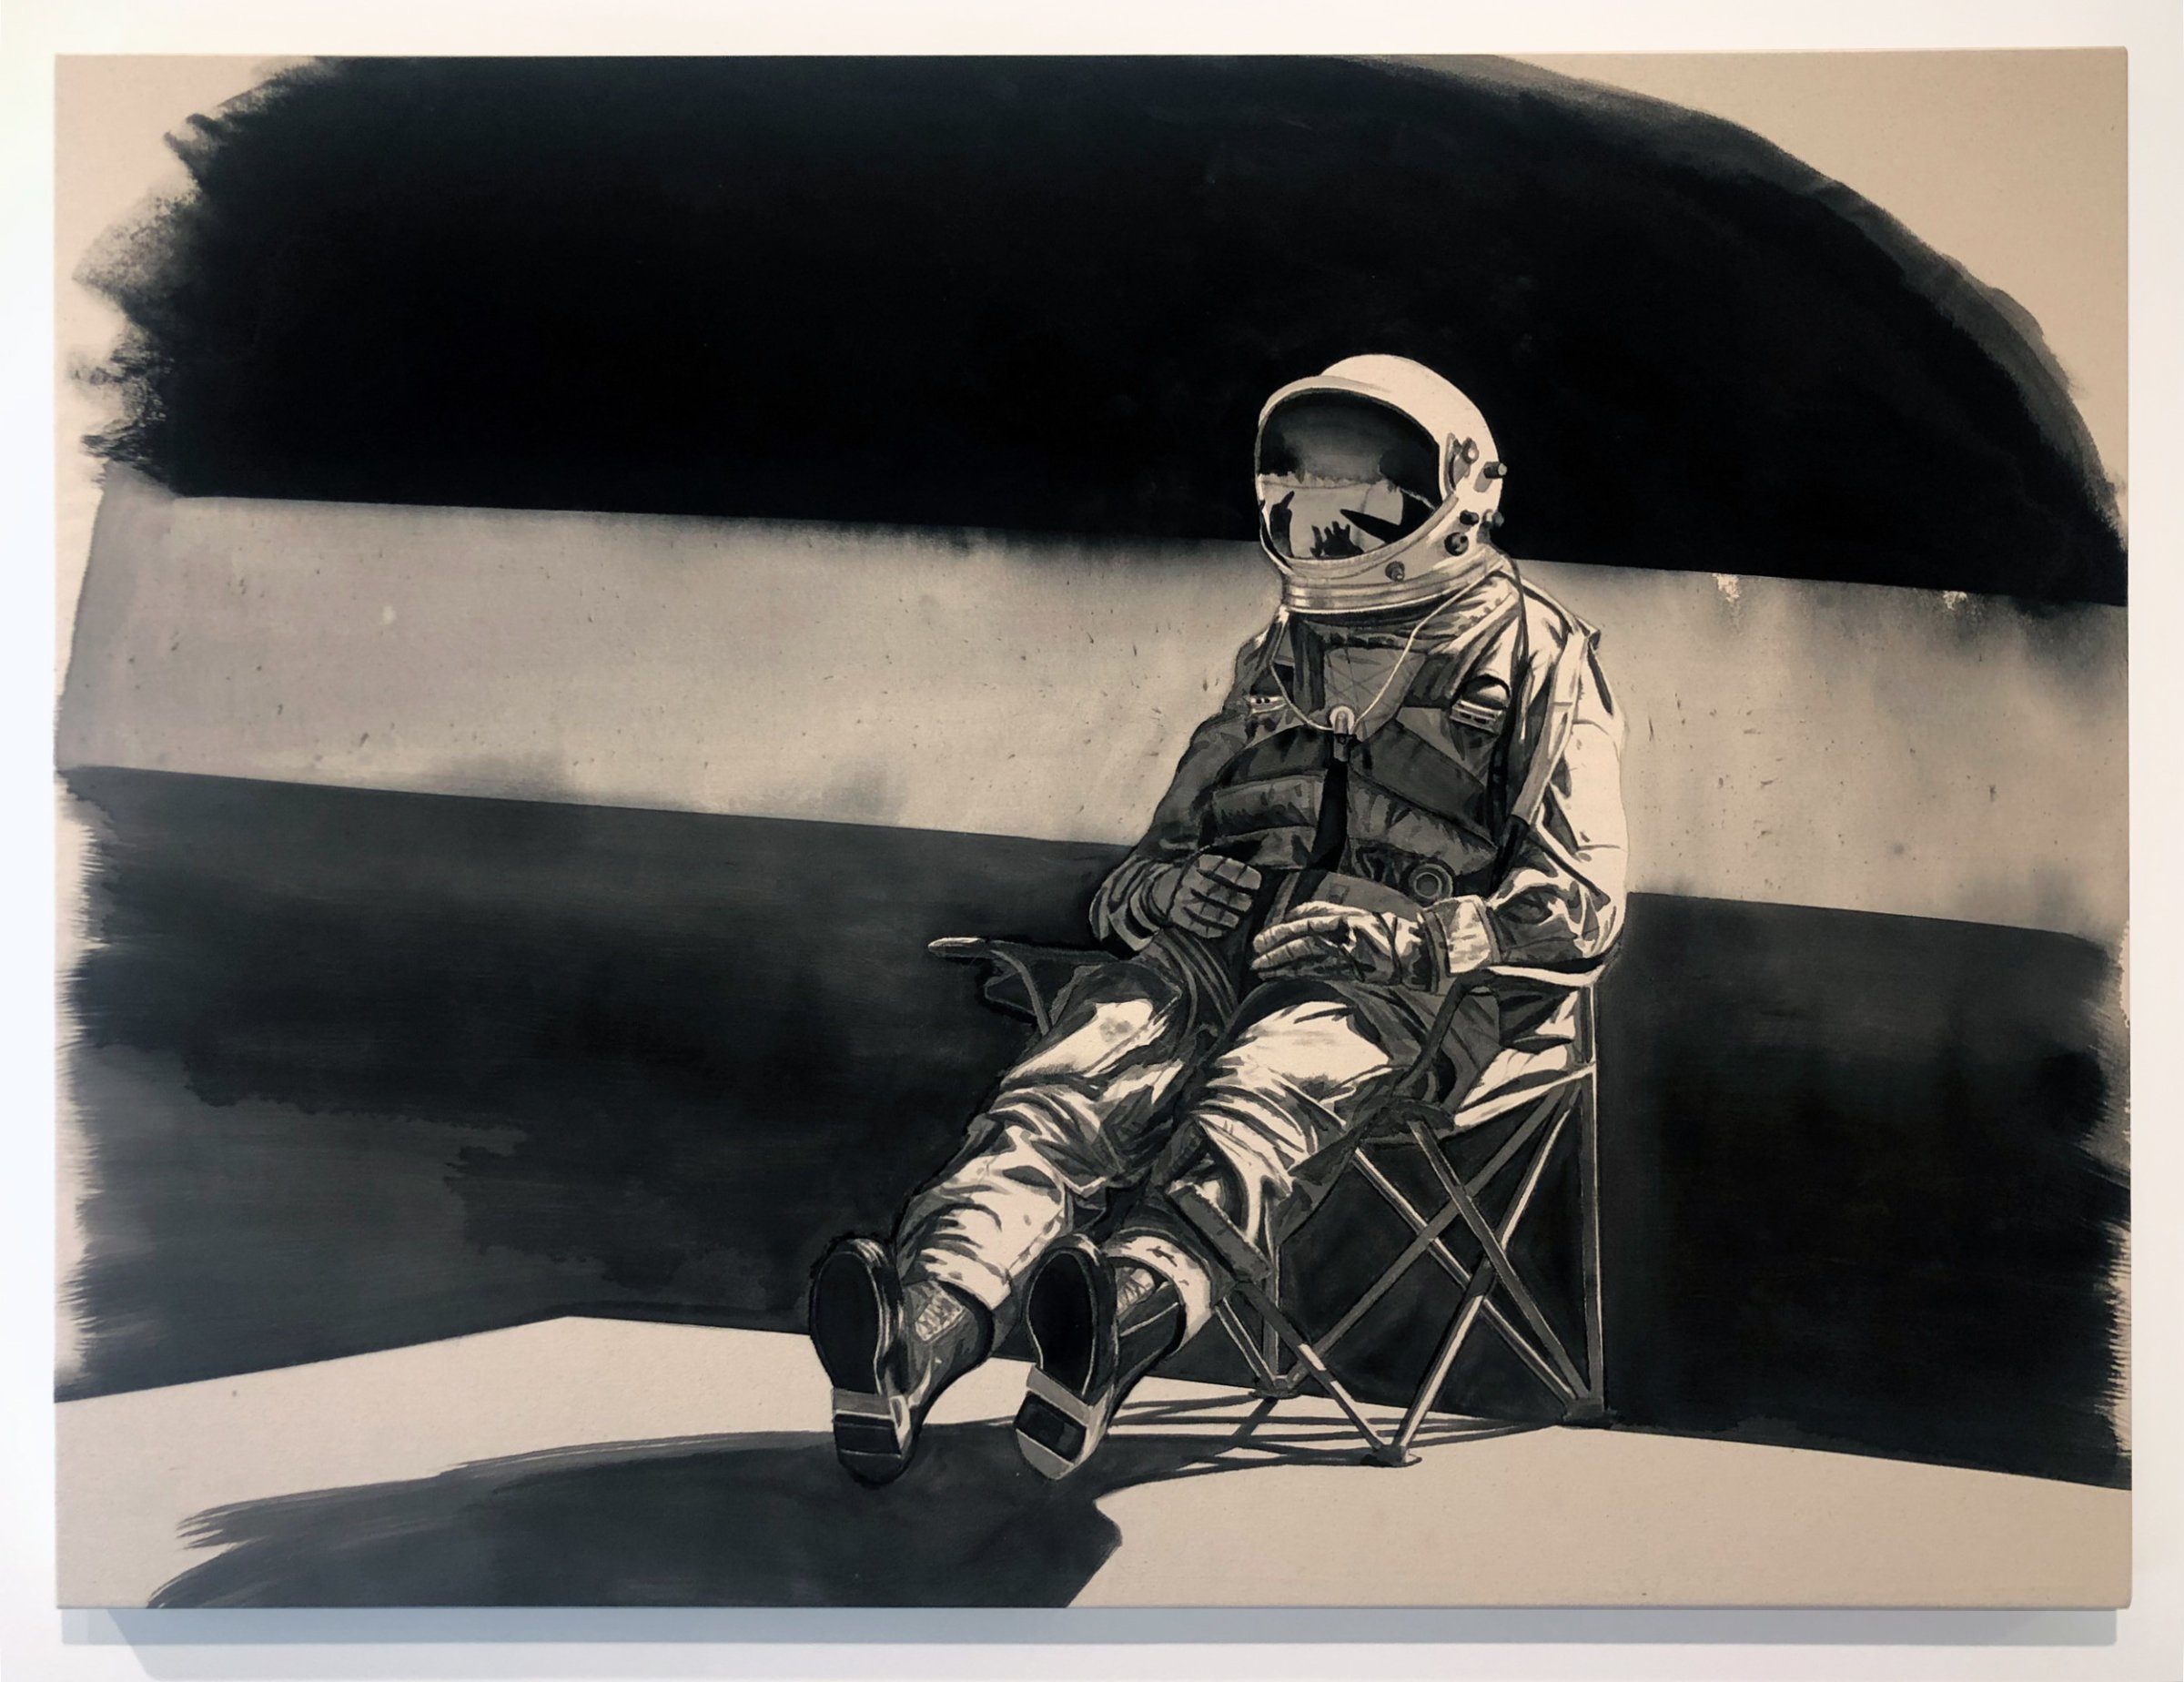   The Astronaut,  2019 Black gesso on canvas 36 x 48 inches (91.4cm x 122cm) 